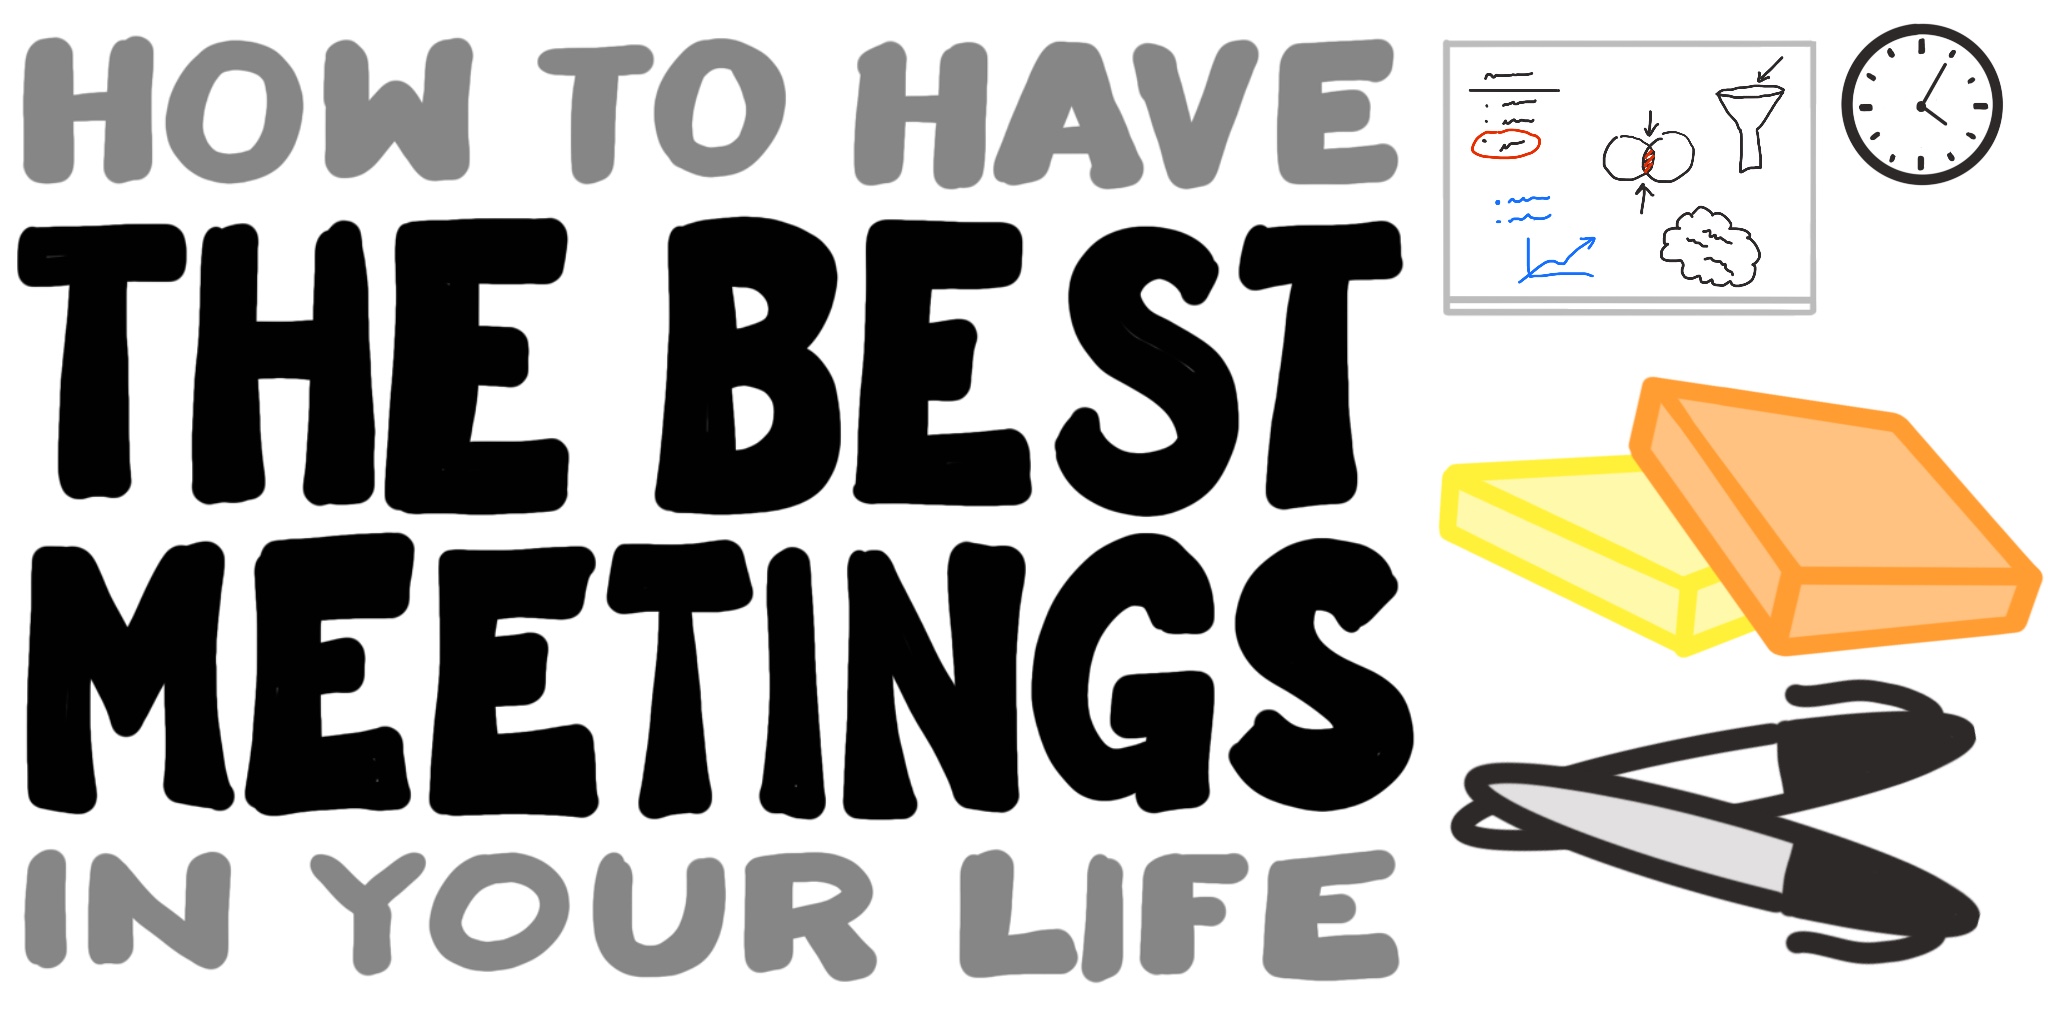 How to Have the Best Meetings in Your Life!